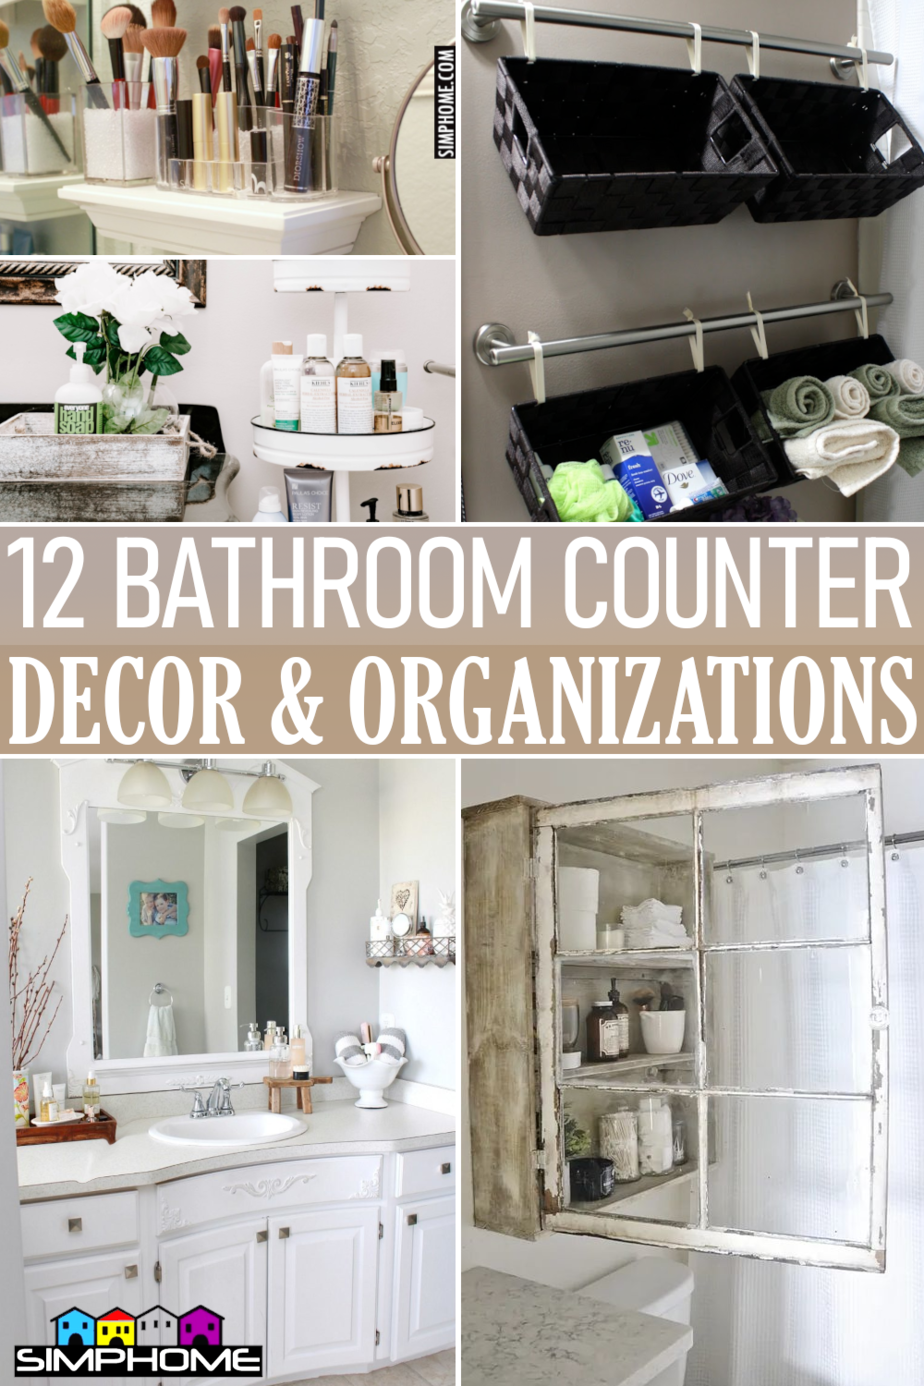 12 Bathroom Counter Decor and Organizations By Simphome.comFeatured